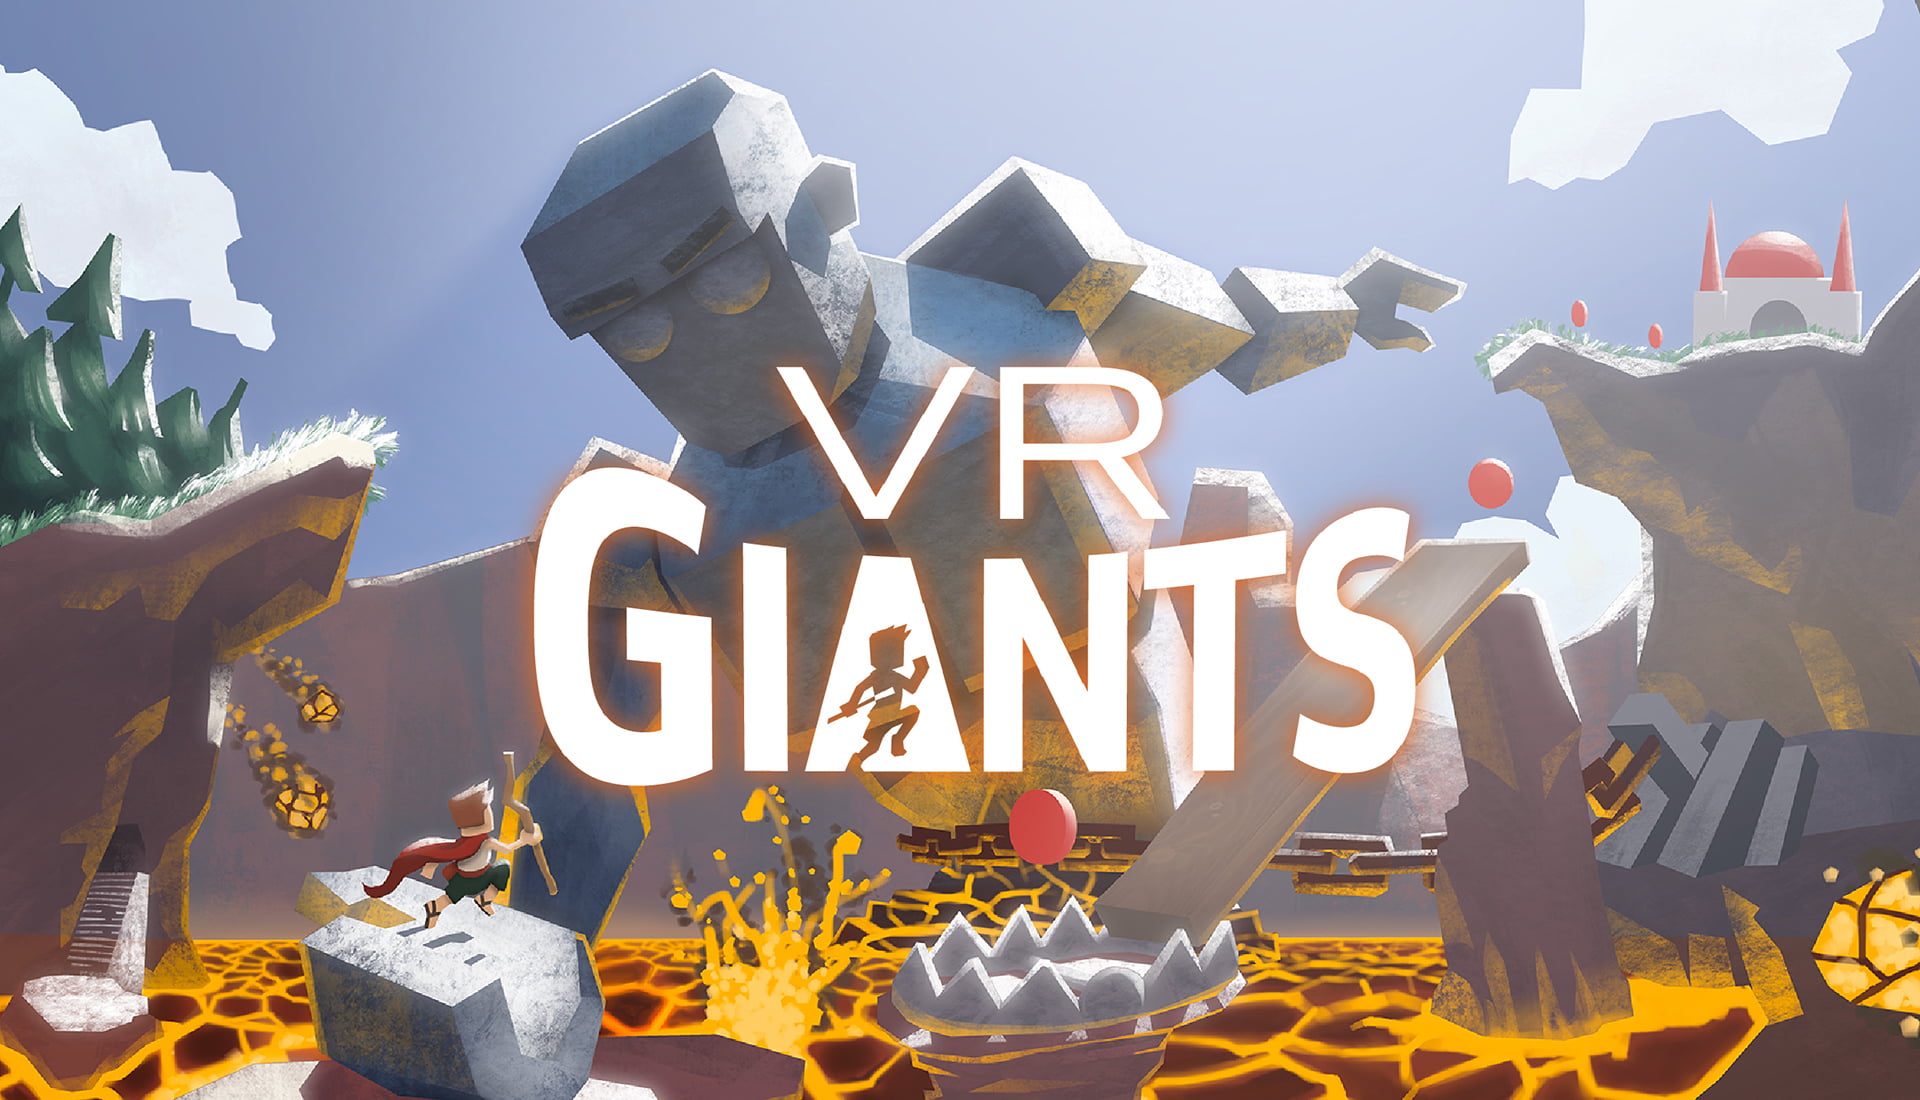 VR Giants: Asymmetrical co-op game with new graphics style and content